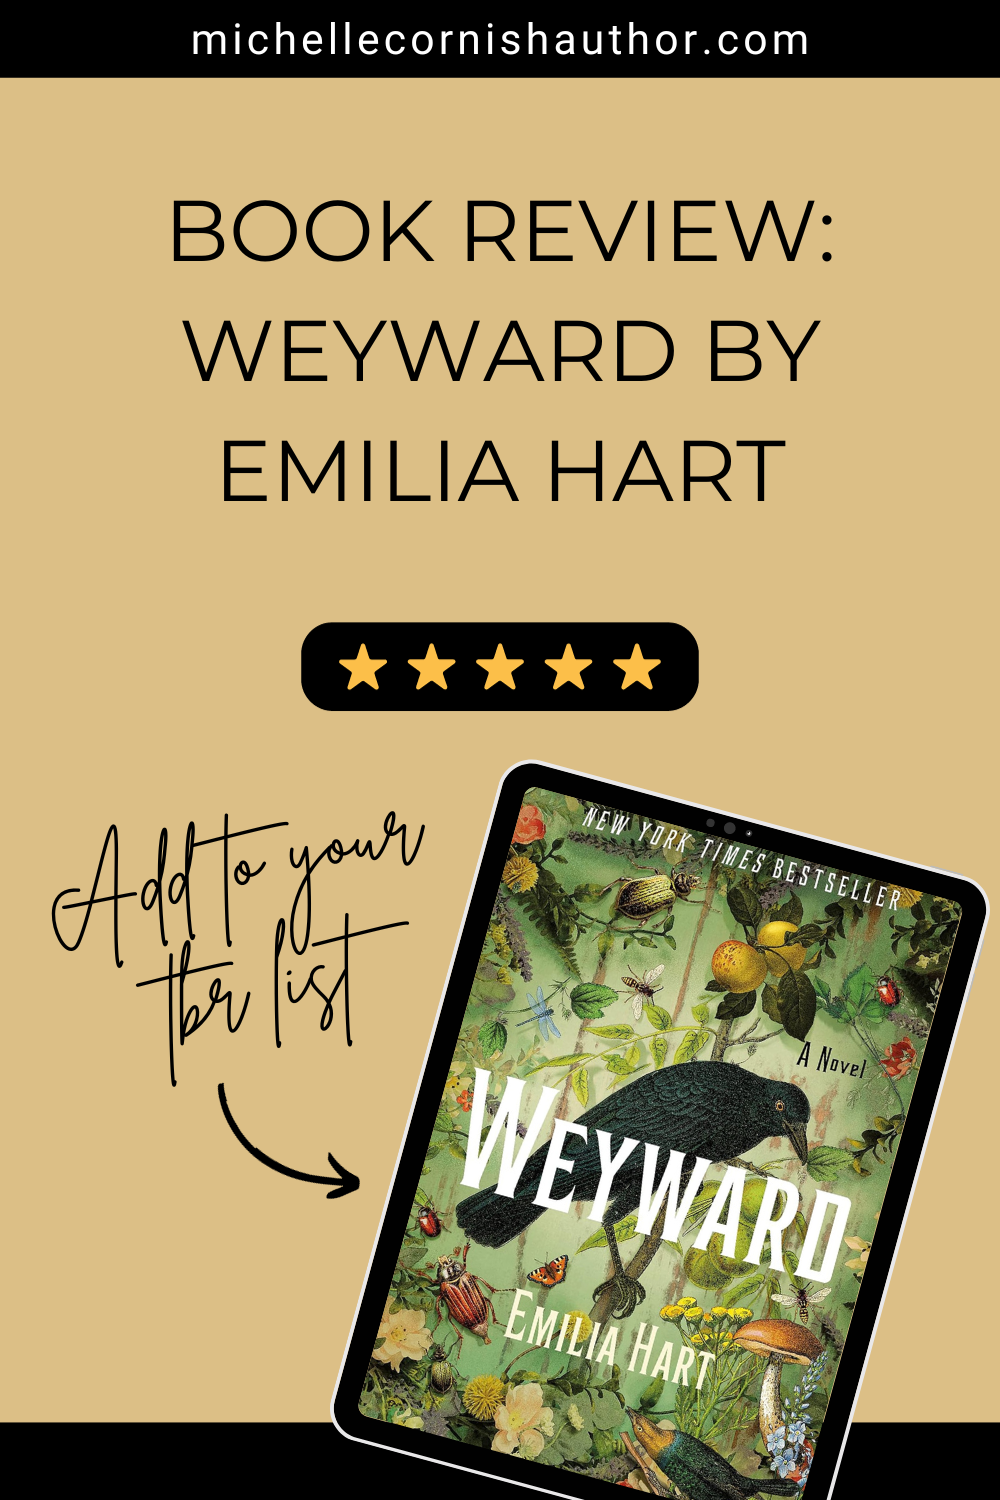 Book Review of Weyward by Emilia Hart